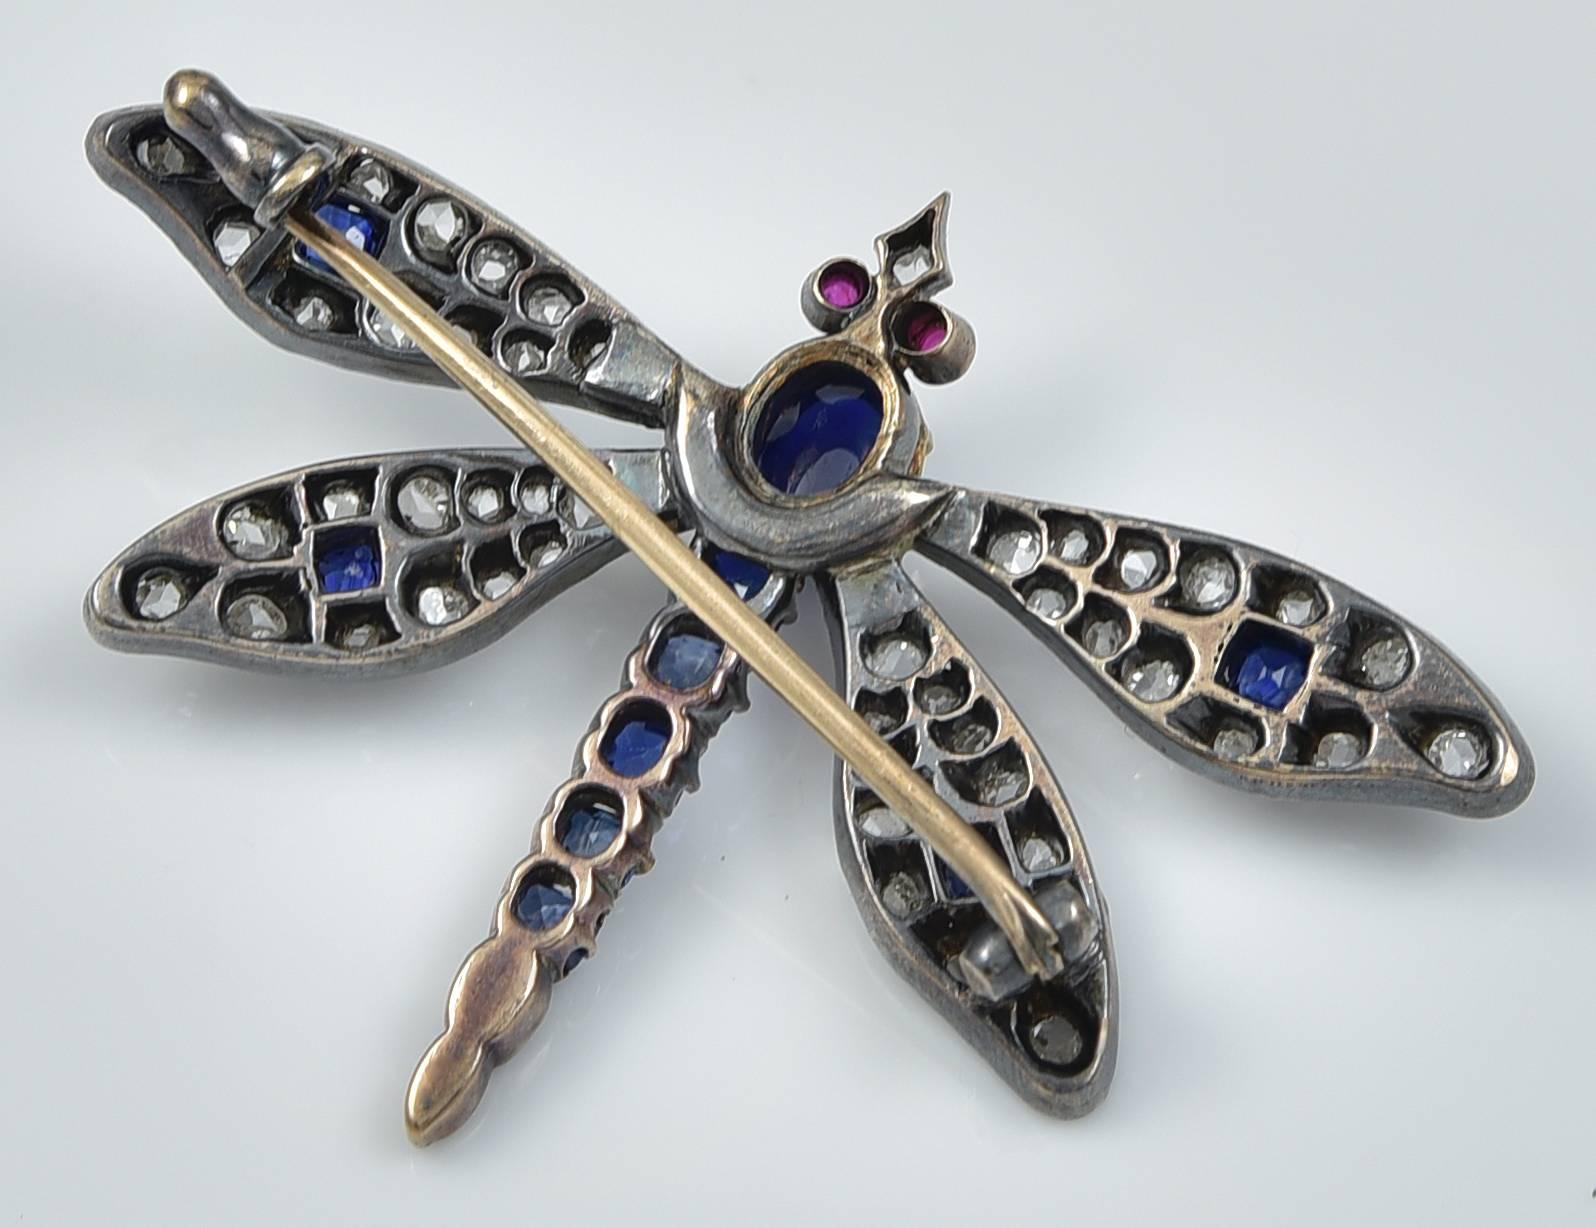 The body set with a cabochon Sapphire and five faceted Sapphires and the head with cabochon Ruby Eyes. The four wings contain over fifty Rose Diamonds and a faceted Sapphire in each and the Dragonfly is constructed of 18k Gold and Silver. The